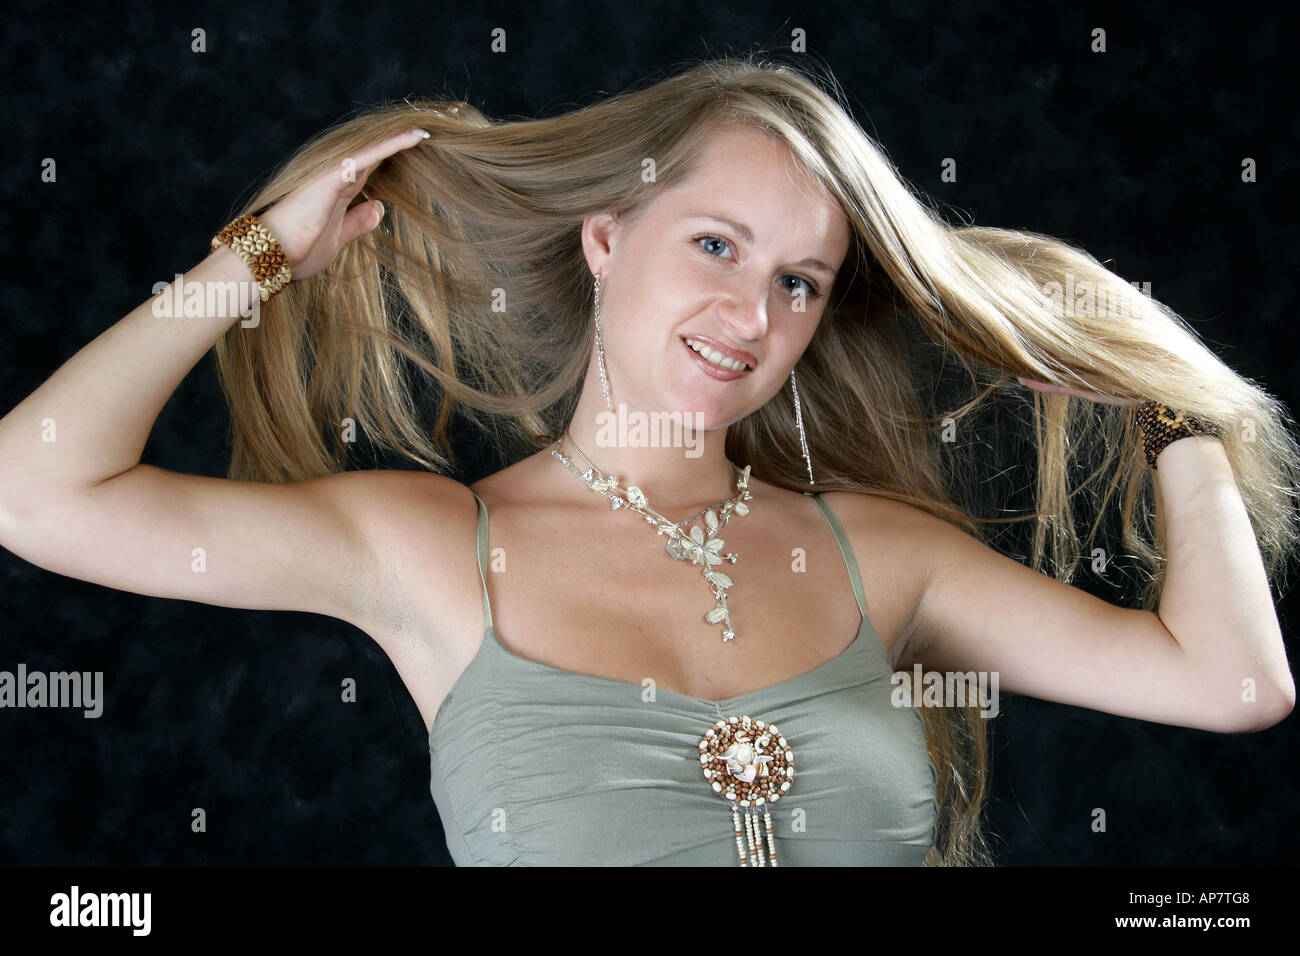 Portrait of a Young Girl Holding Her Long Blonde Hair Stock Photo